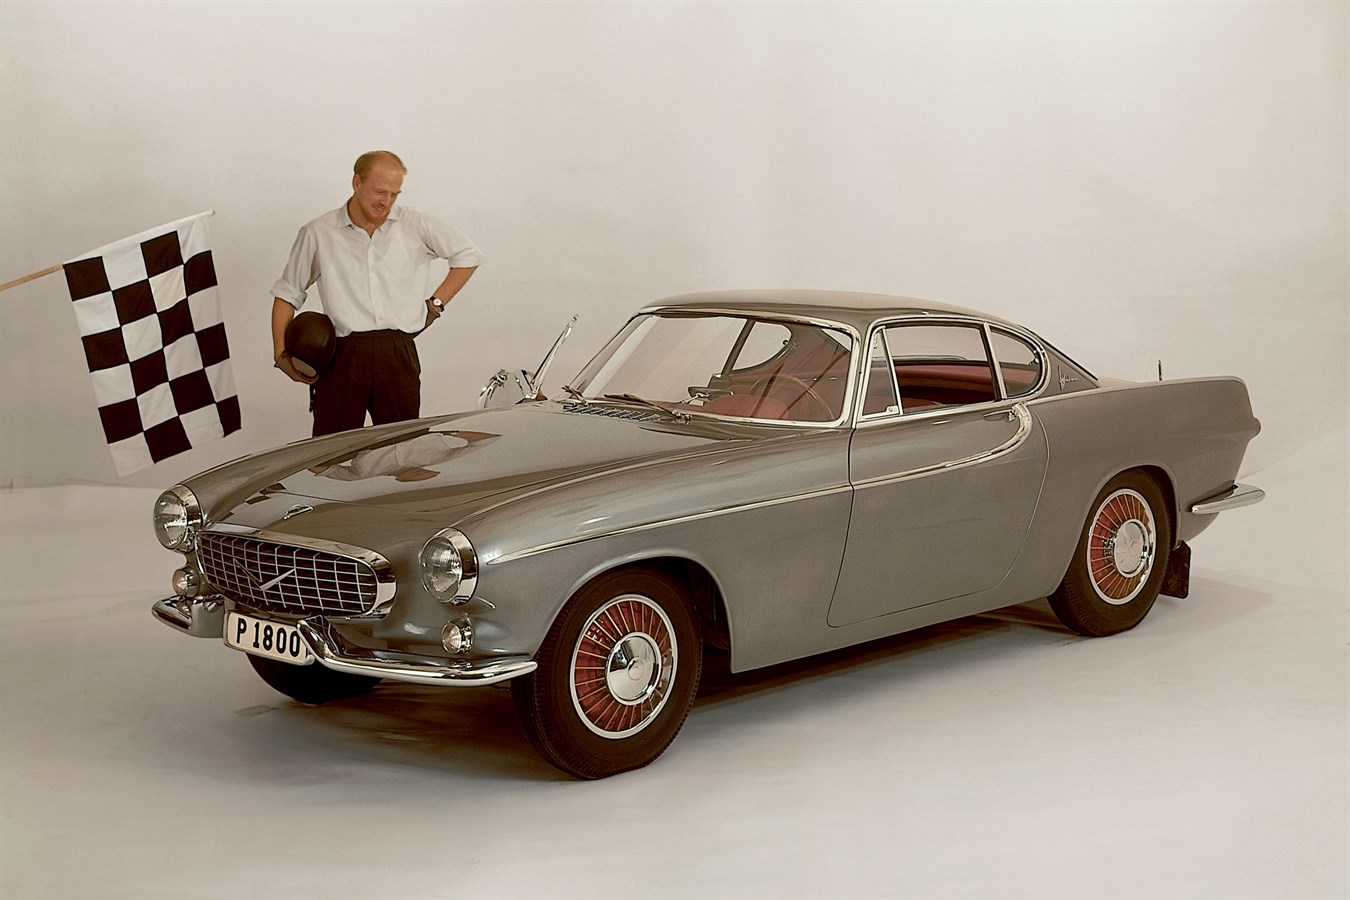 P1800 Prototype, 1960, with non-standard hub caps and rear wing antenna